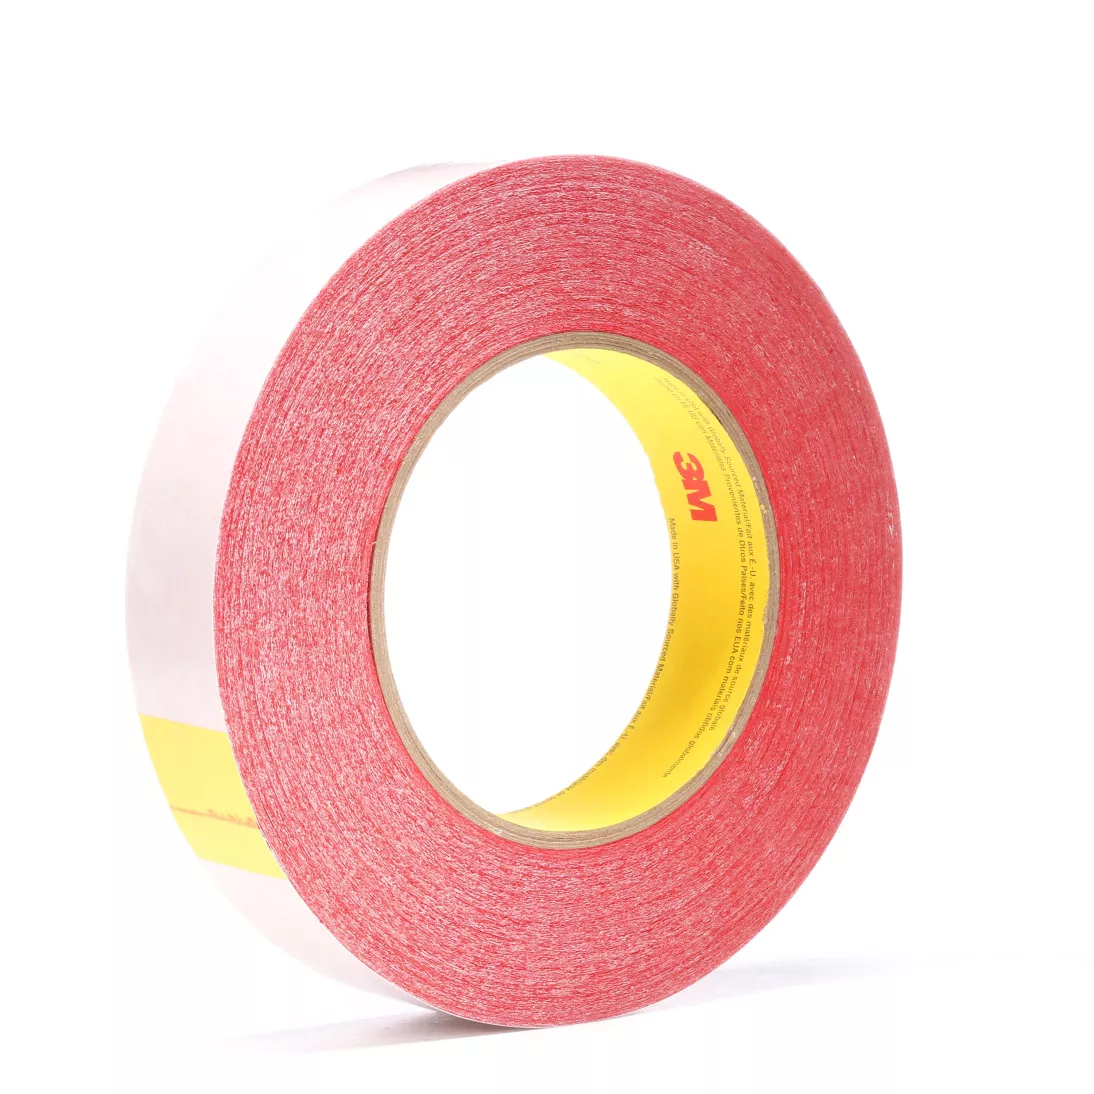 3M™ Double Coated Tape 9737R, Red, 24 mm x 55 m, 3.5 mil, 48 rolls per
case